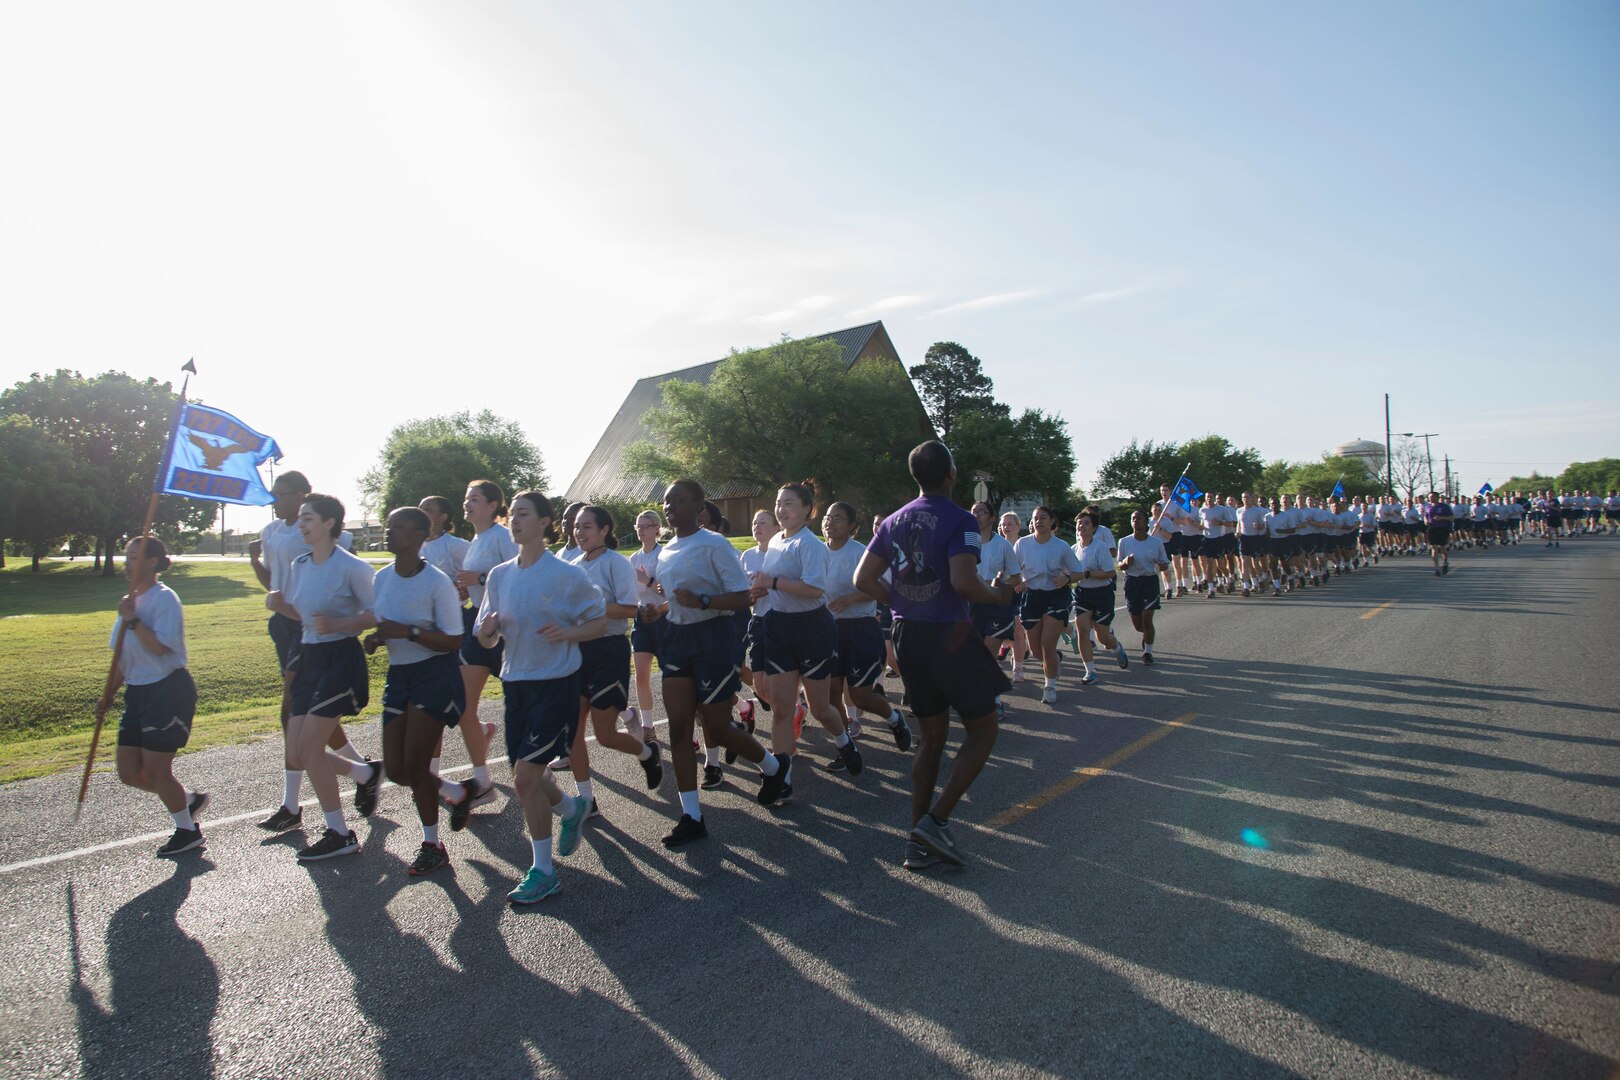 Trainees from the 324th Training Squadron run in formation during the squadron’s inaugural Knight’s Day 5K at the 324th TRS at Joint Base San Antonio-Lackland, Texas, March 25, 2017. Three trainees from each flight who exemplify the squadron’s motto of “ready for battle” represented their squadron and ran separately to compete for first place and flight pride. 